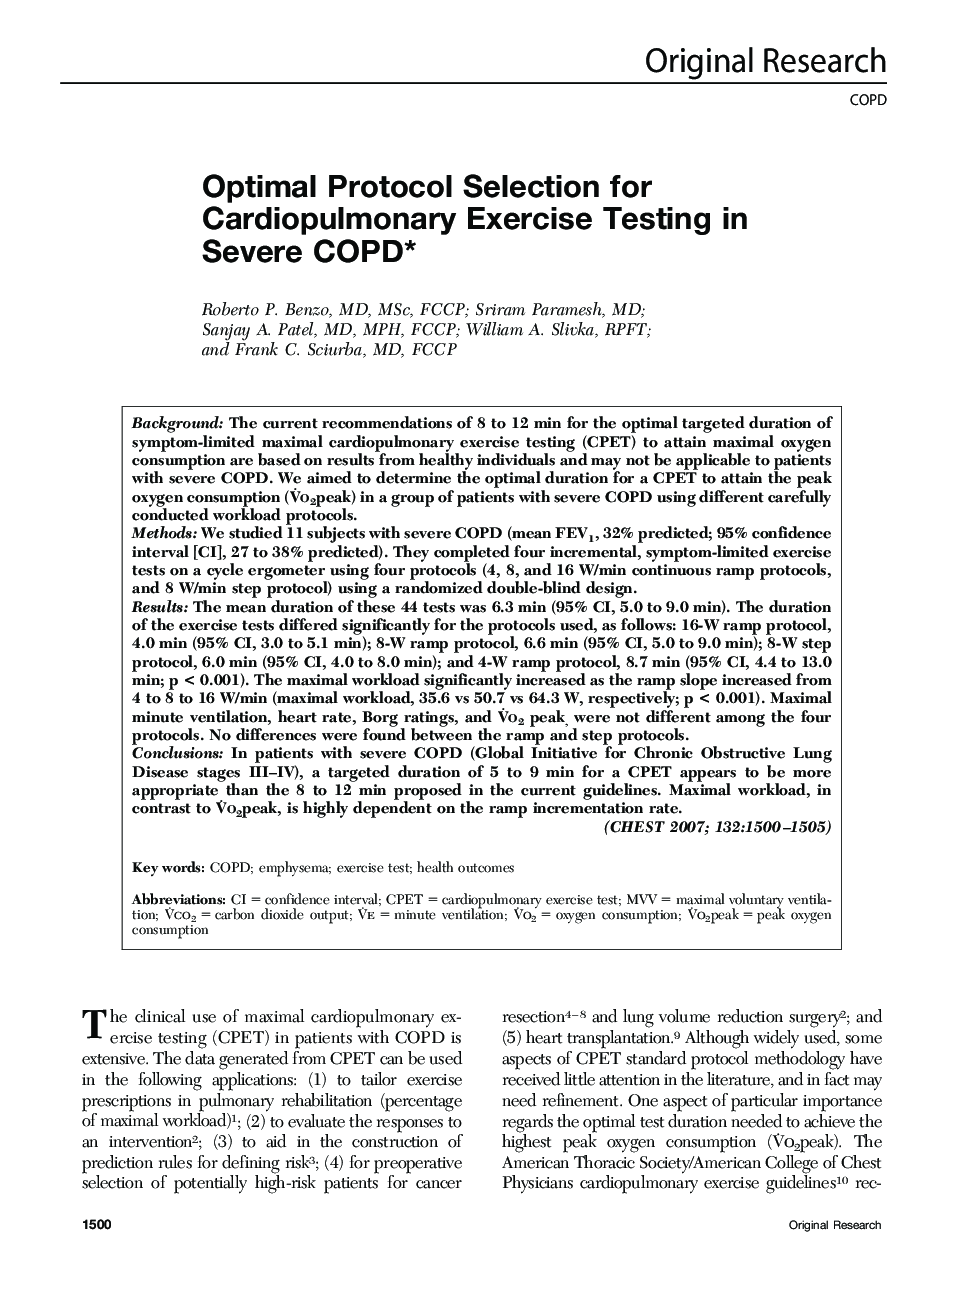 Optimal Protocol Selection for Cardiopulmonary Exercise Testing in Severe COPD 